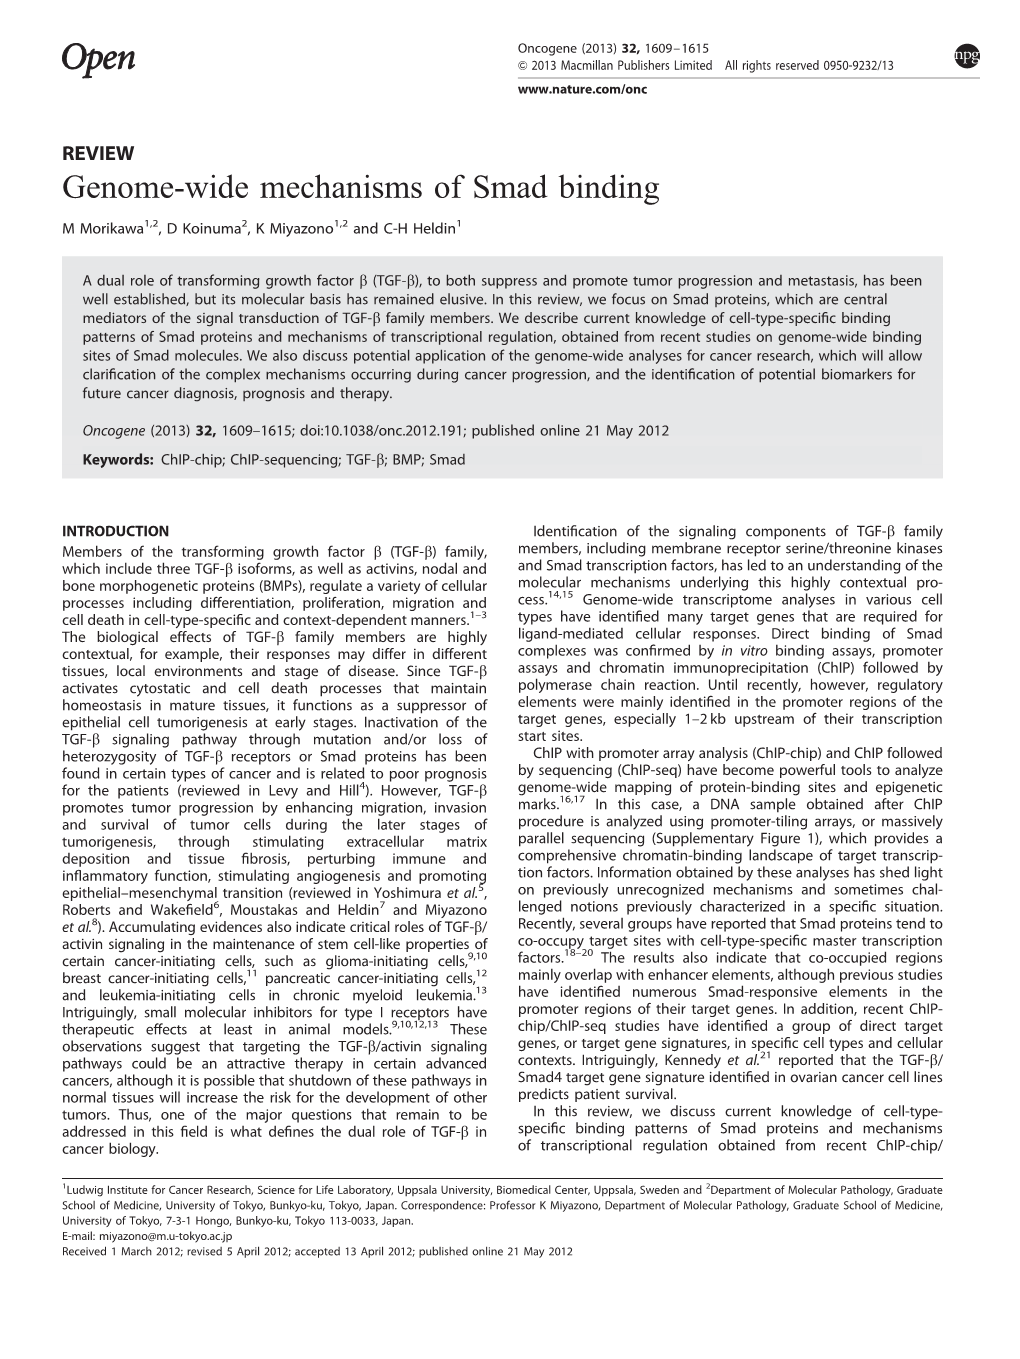 Genome-Wide Mechanisms of Smad Binding